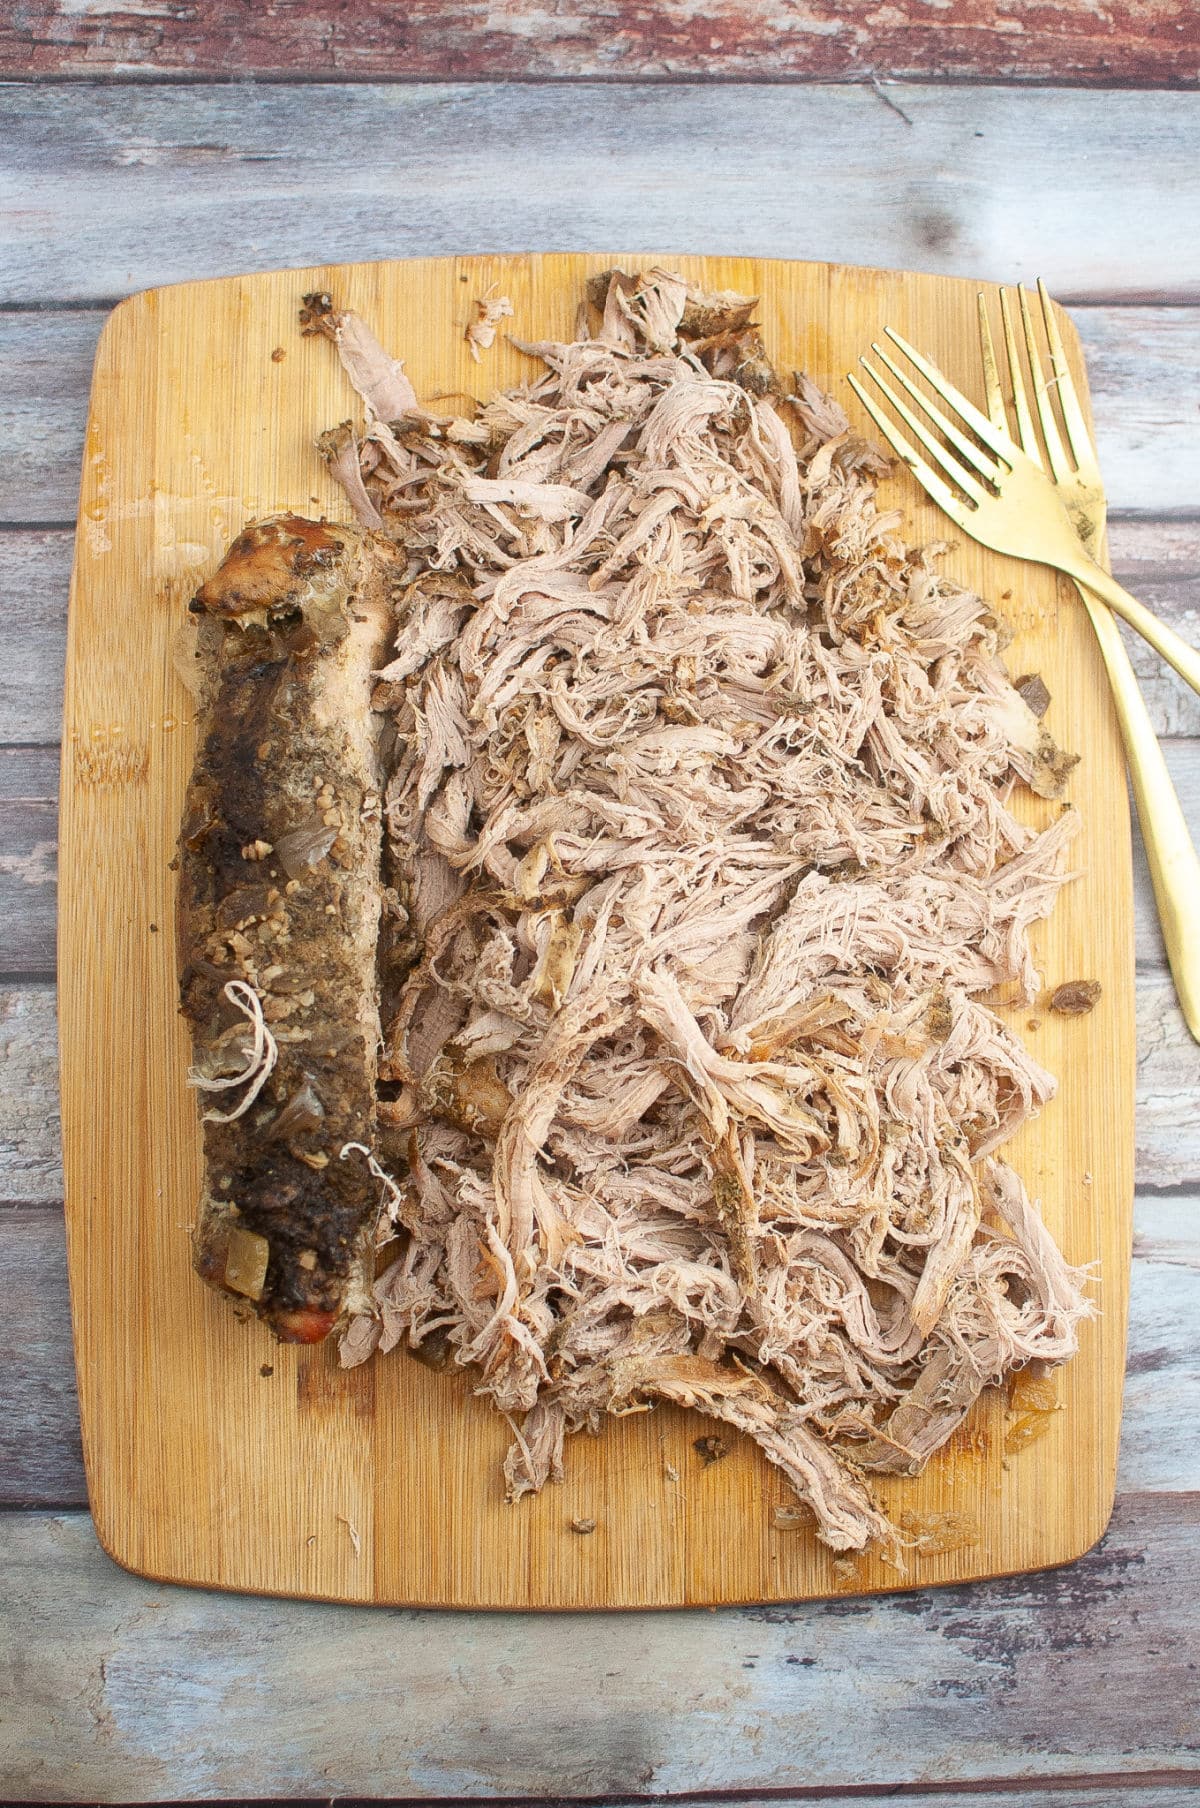 Shredded meat on cutting board with two forks.